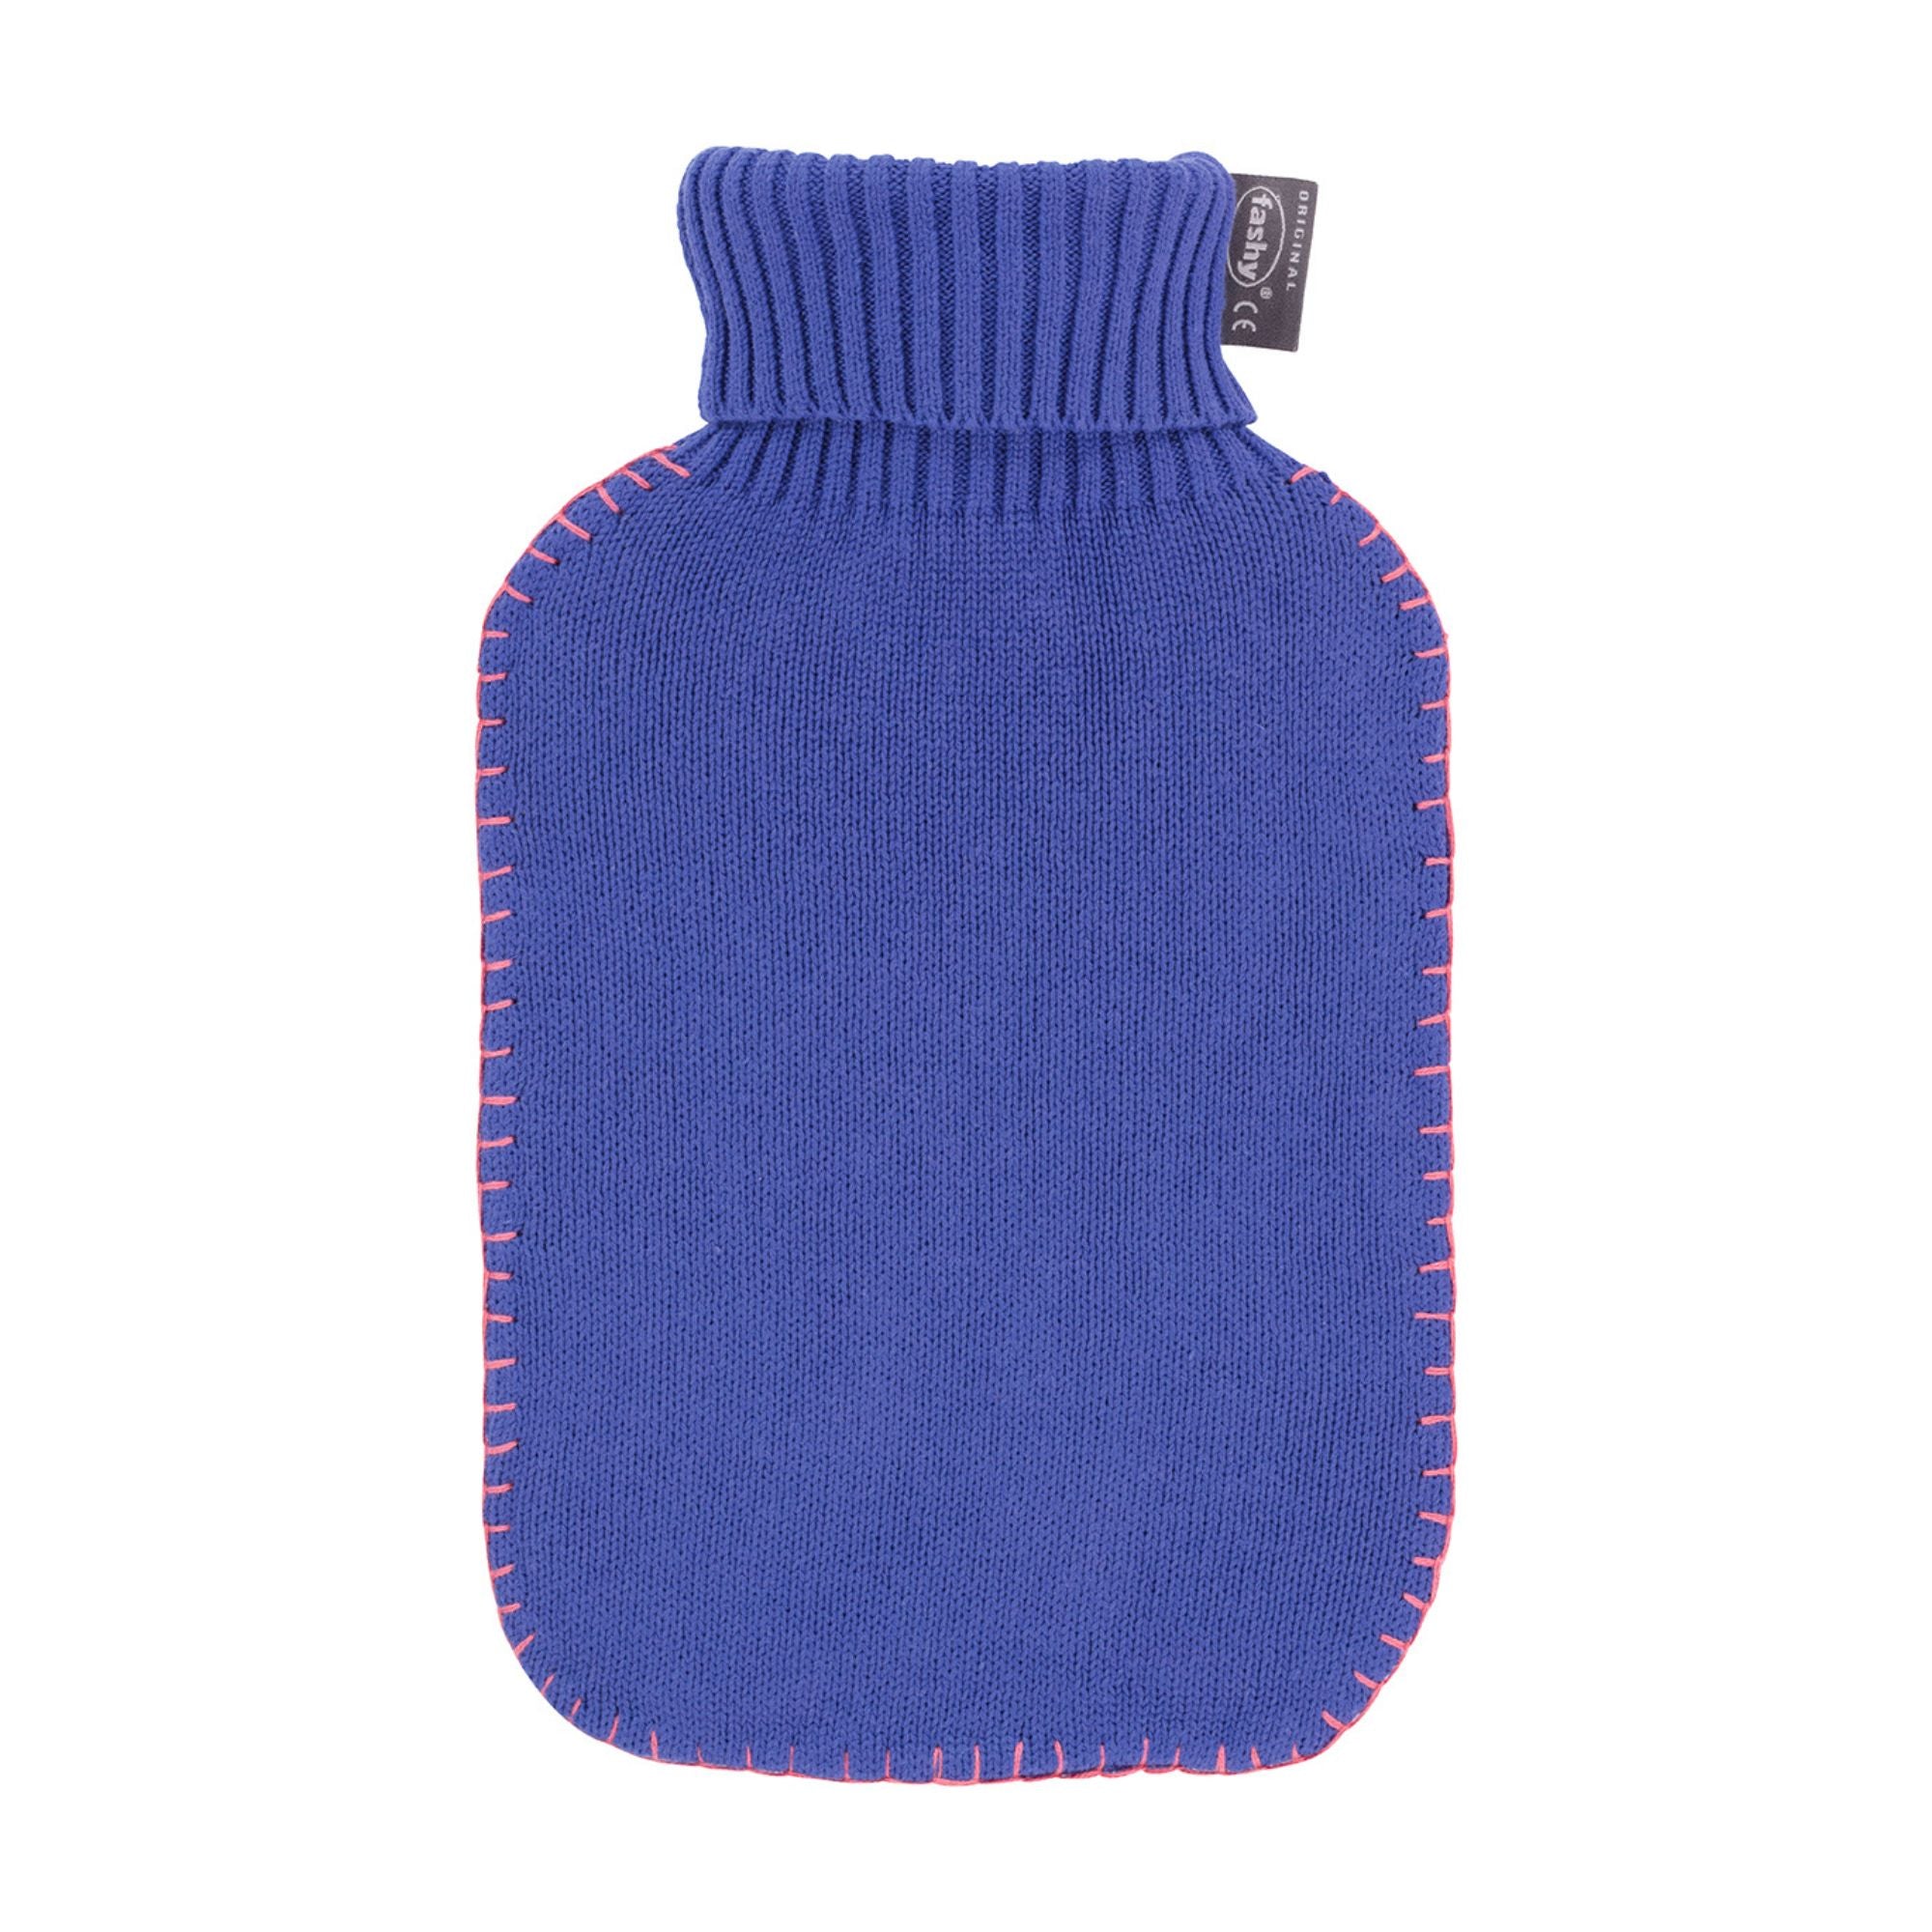 2 Litre Fashy Hot Water Bottle with Royal Blue Knitted Stitched Seam Cotton Cover